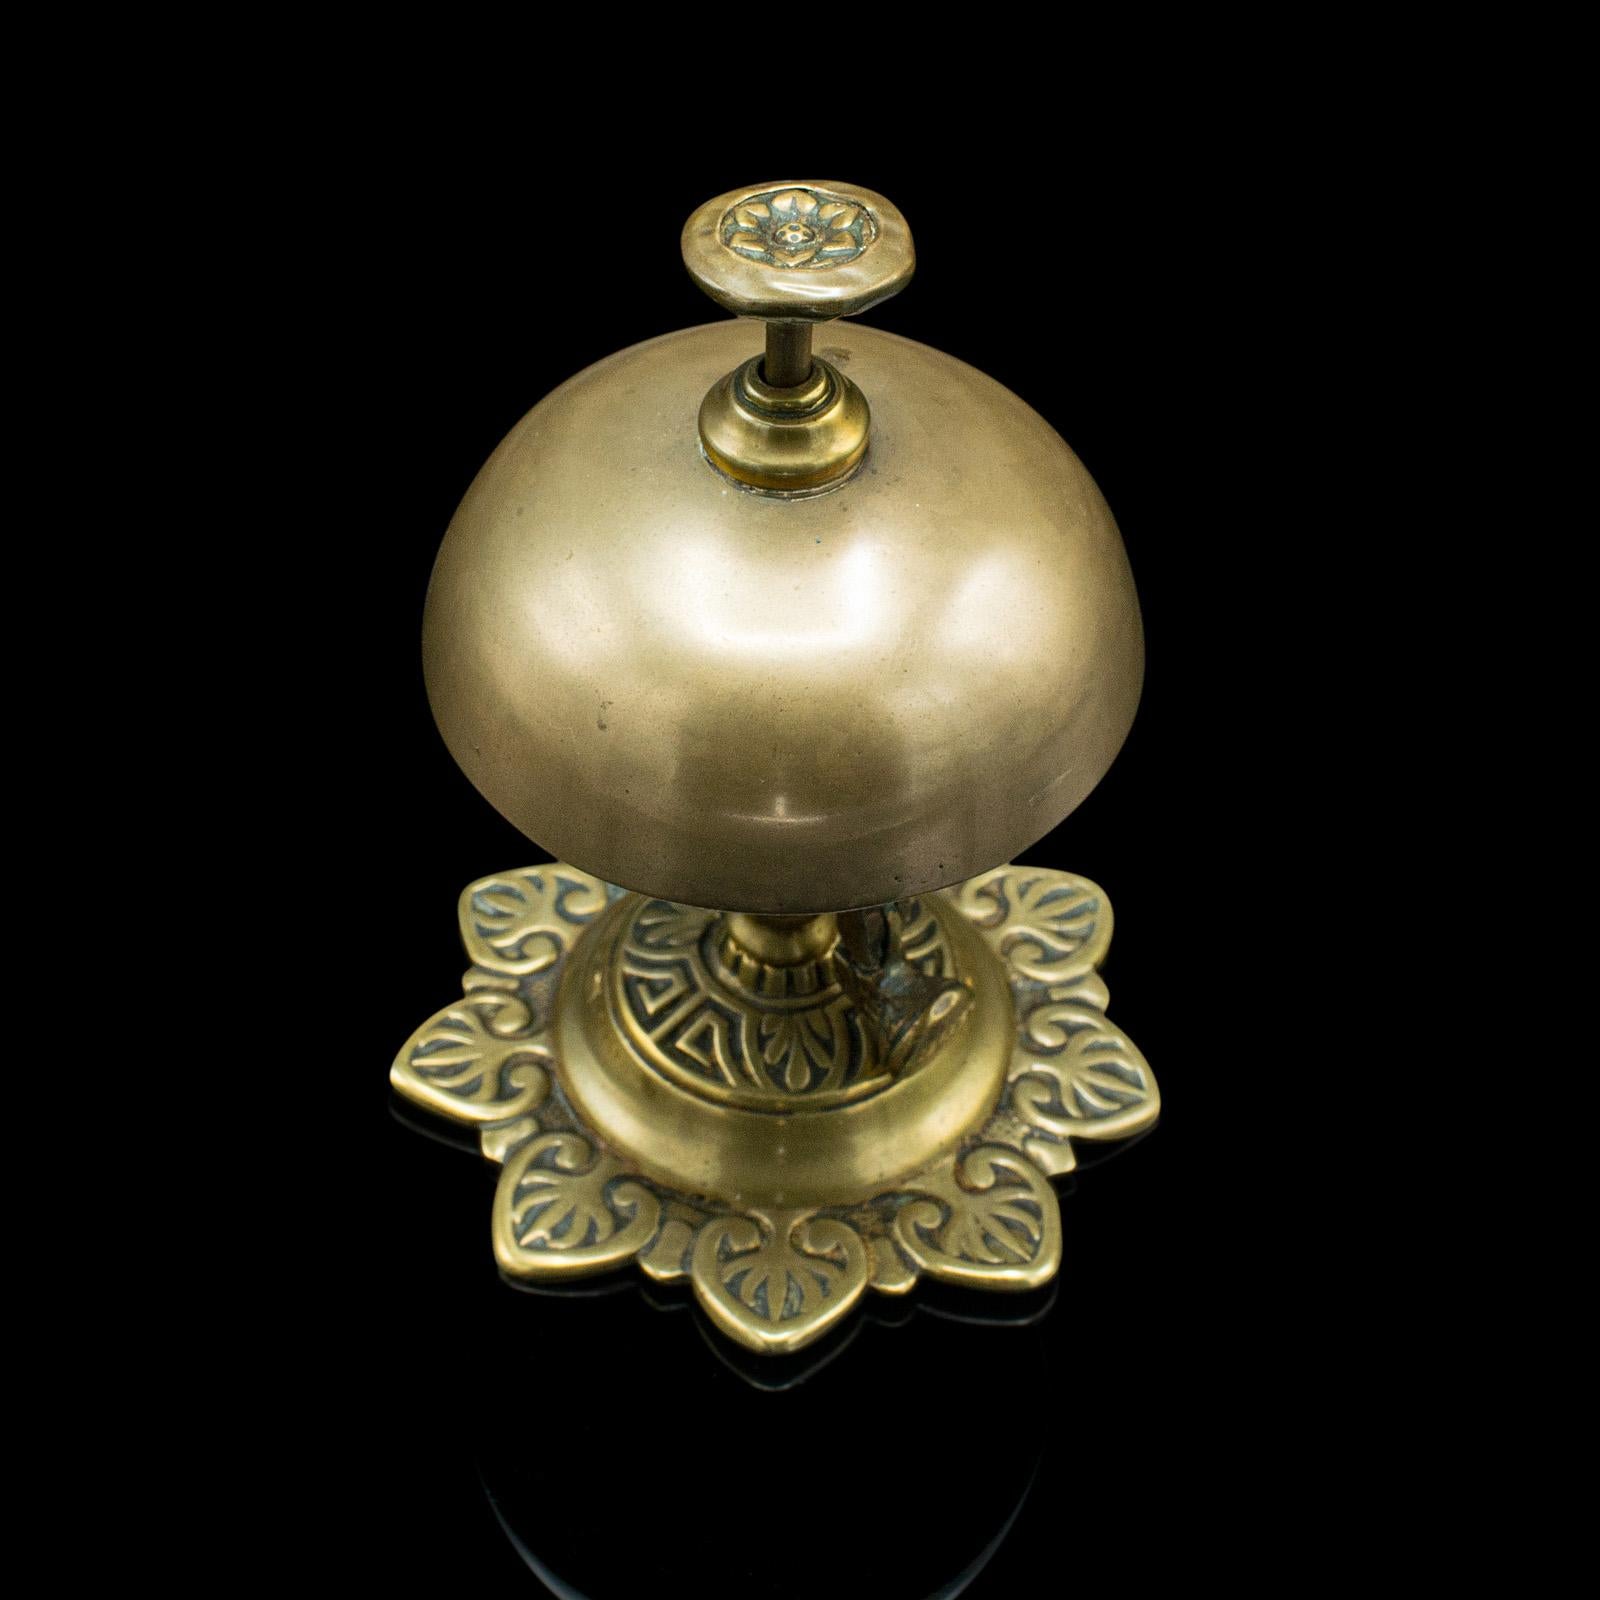 19th Century Antique Reception Bell, English, Brass, Country House, Counter Top, Victorian